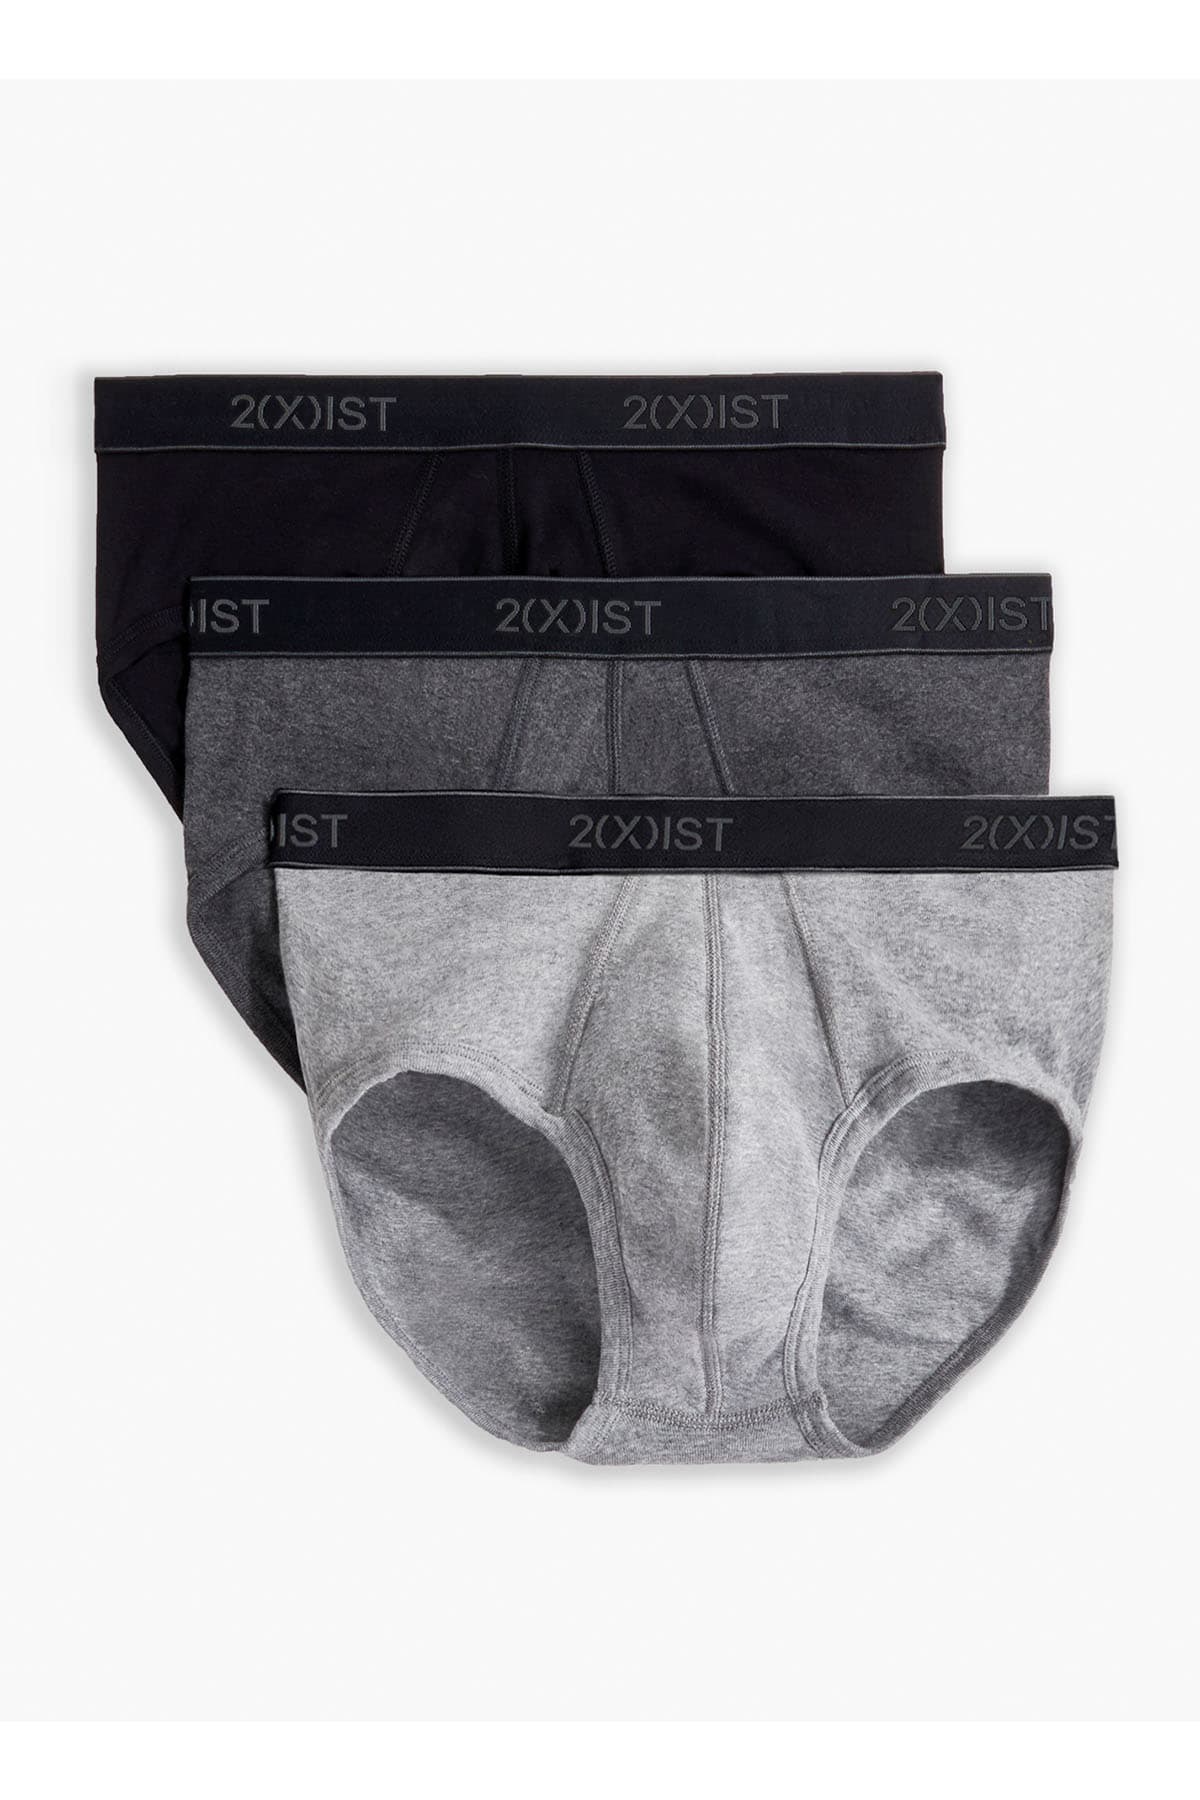 2(X)IST Grey/Black/Charcoal Essential Contour Brief 3-Pack